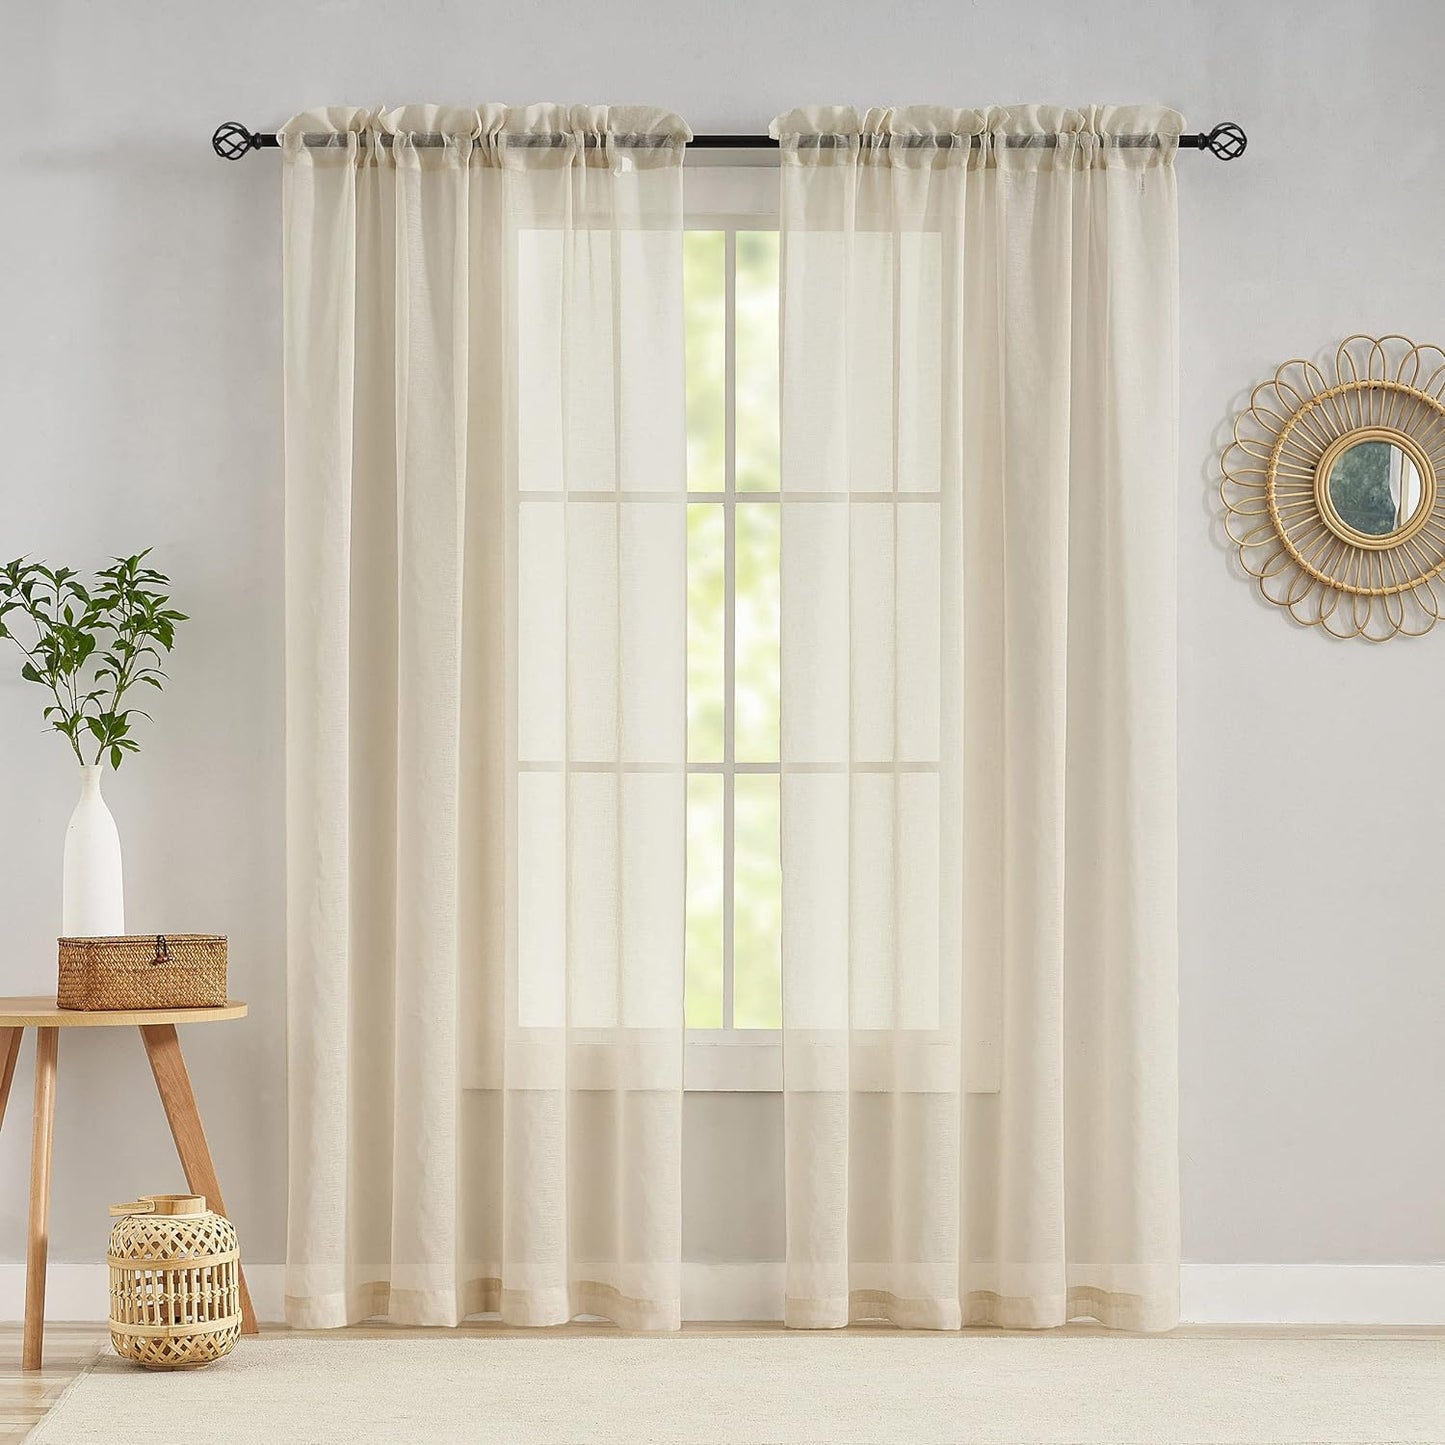 Demetex Sheer Linen Curtains 72 Inches Long Natrual Semi Sheer Curtain Decorative Panels for Living Room Bedroom Porch Window Dressing, 54 X 72 Inches, 2 Pieces, Beige  Demetex Sheer Linen W 54"X L 72" 